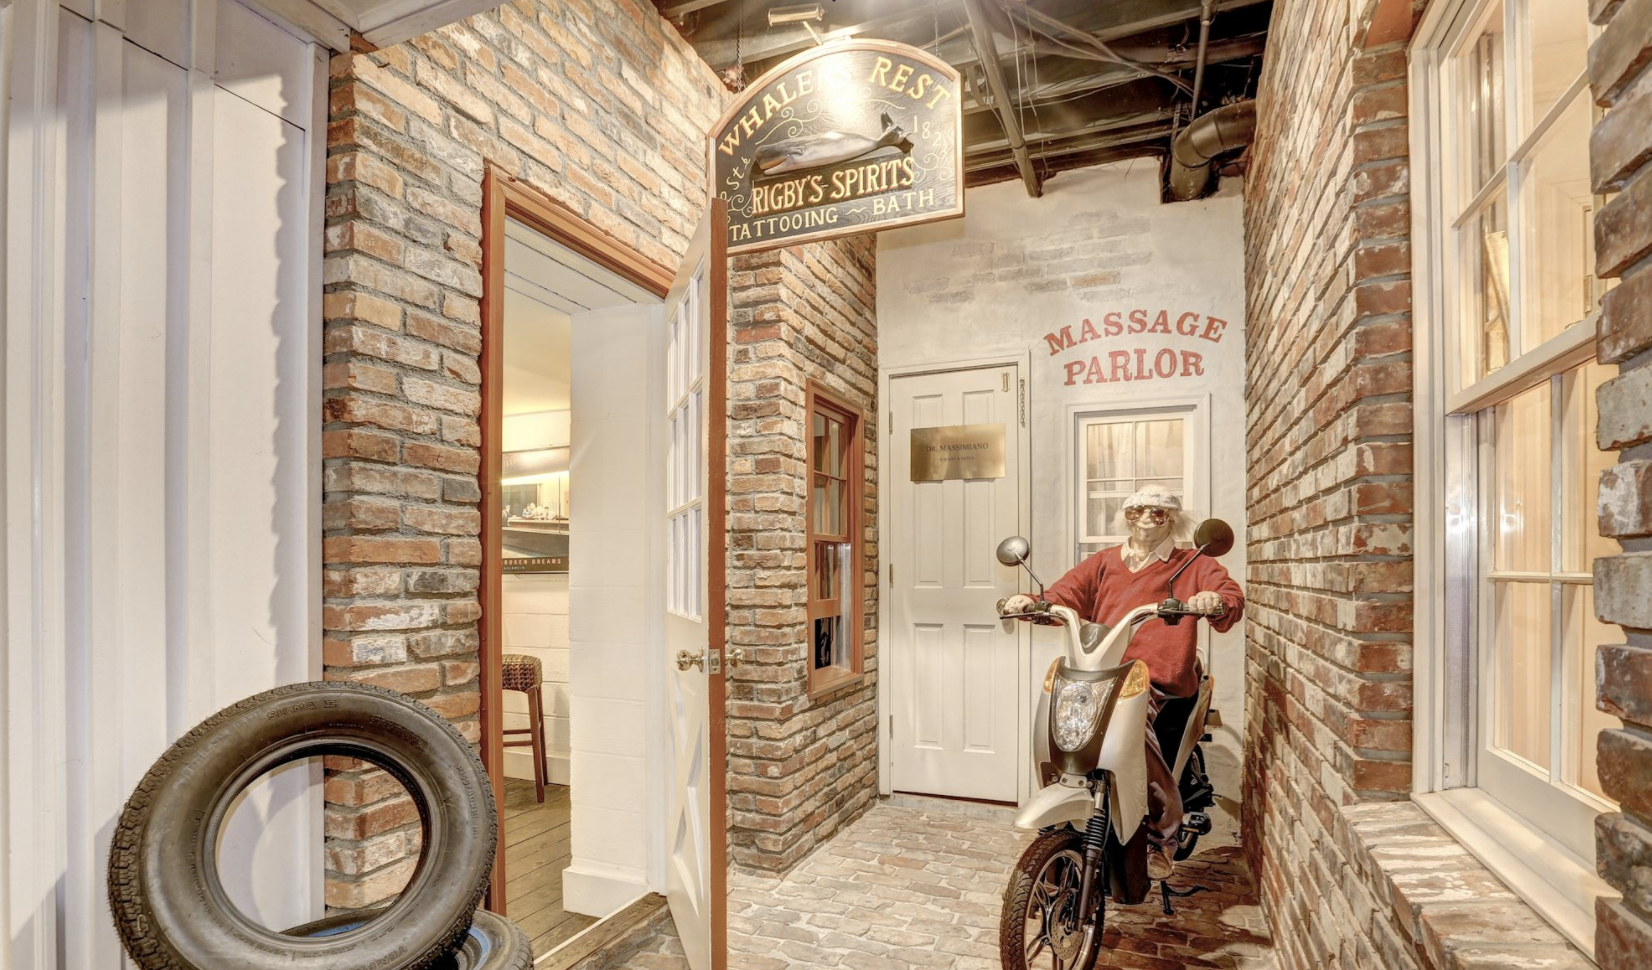 There’s A Life-Sized Fake Town Complete With Real Cars In This Mansion’s Basement